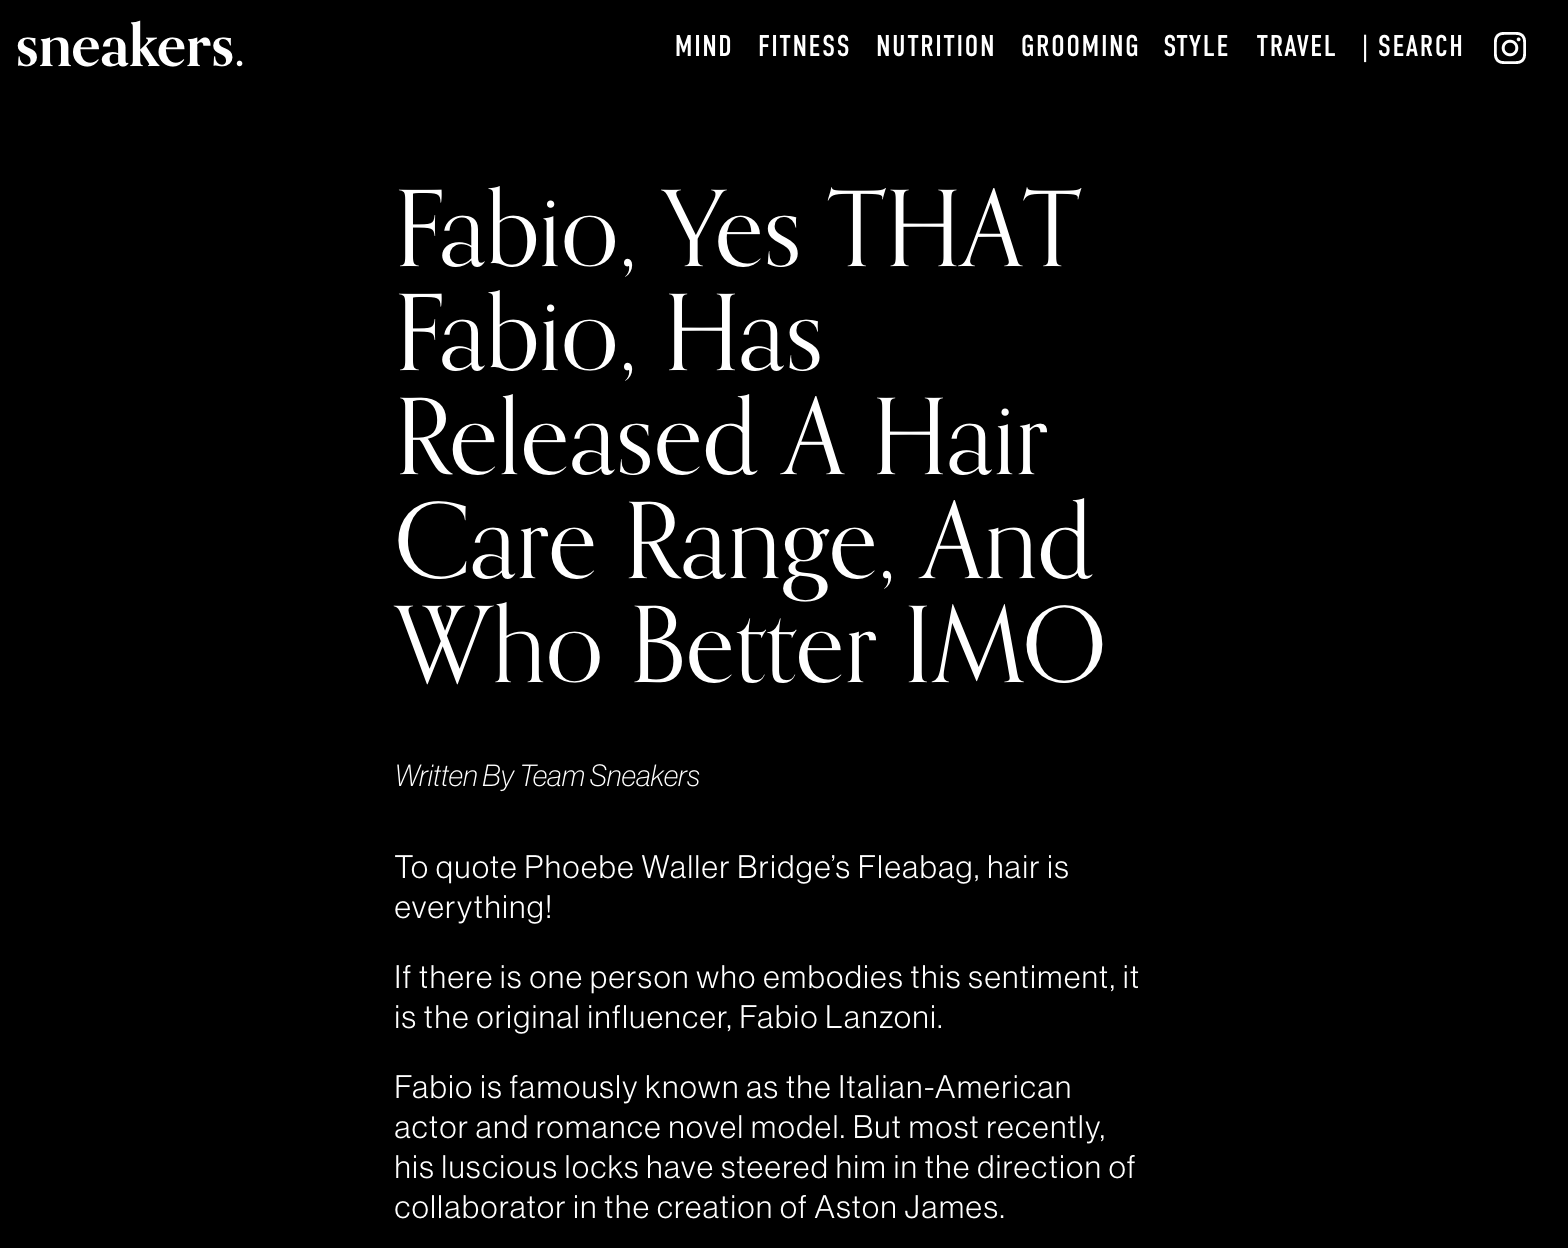 Fabio, Yes THAT Fabio, Has Released A Hair Care Range, And Who Better IMO